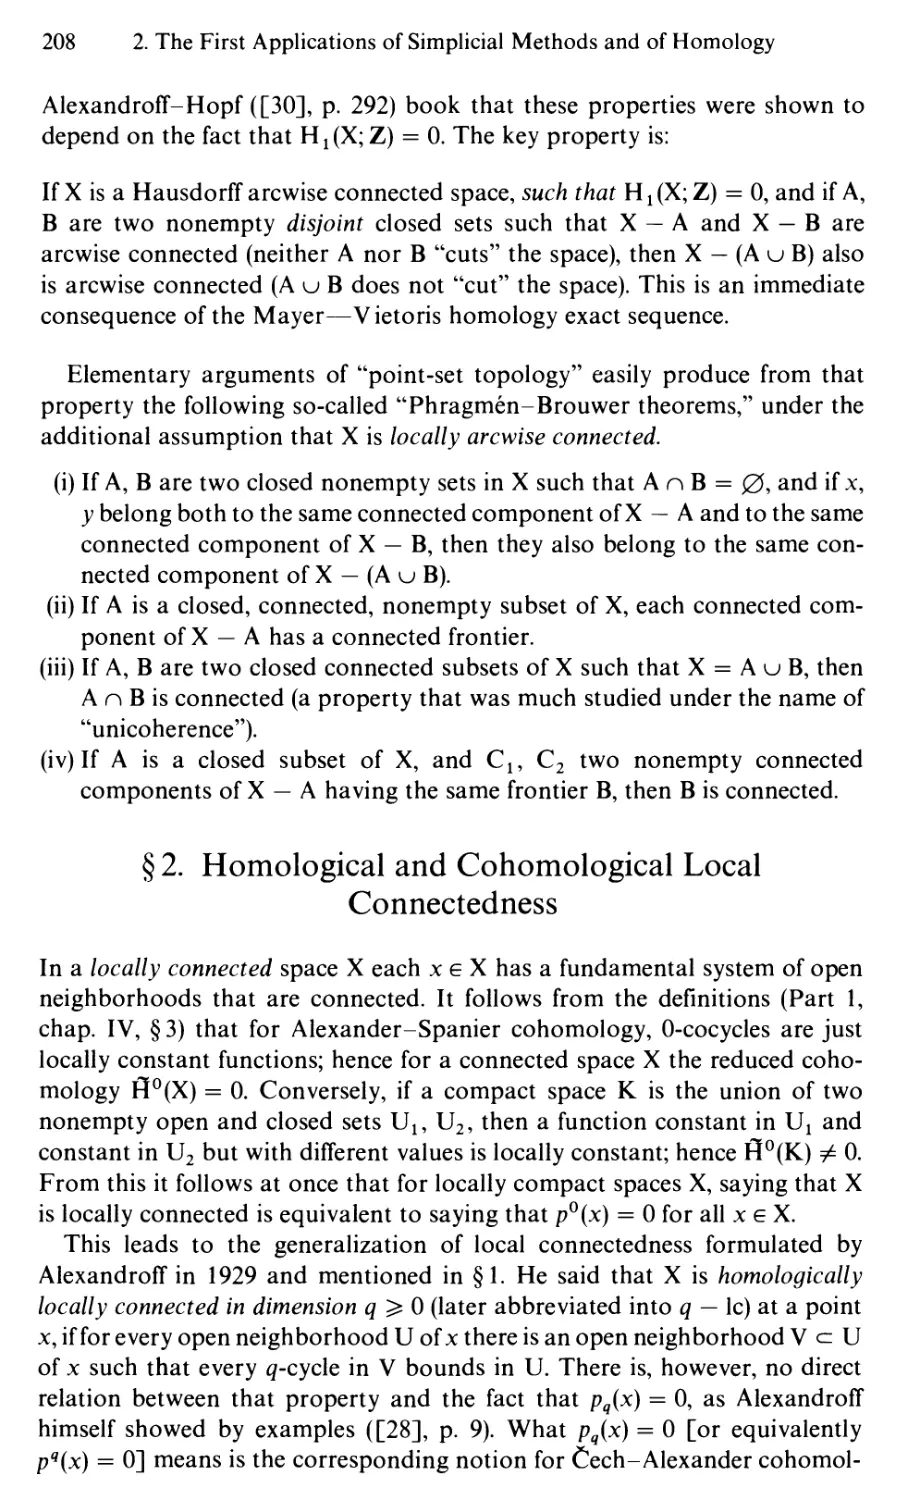 §2. Homological and Cohomological Local Connectedness